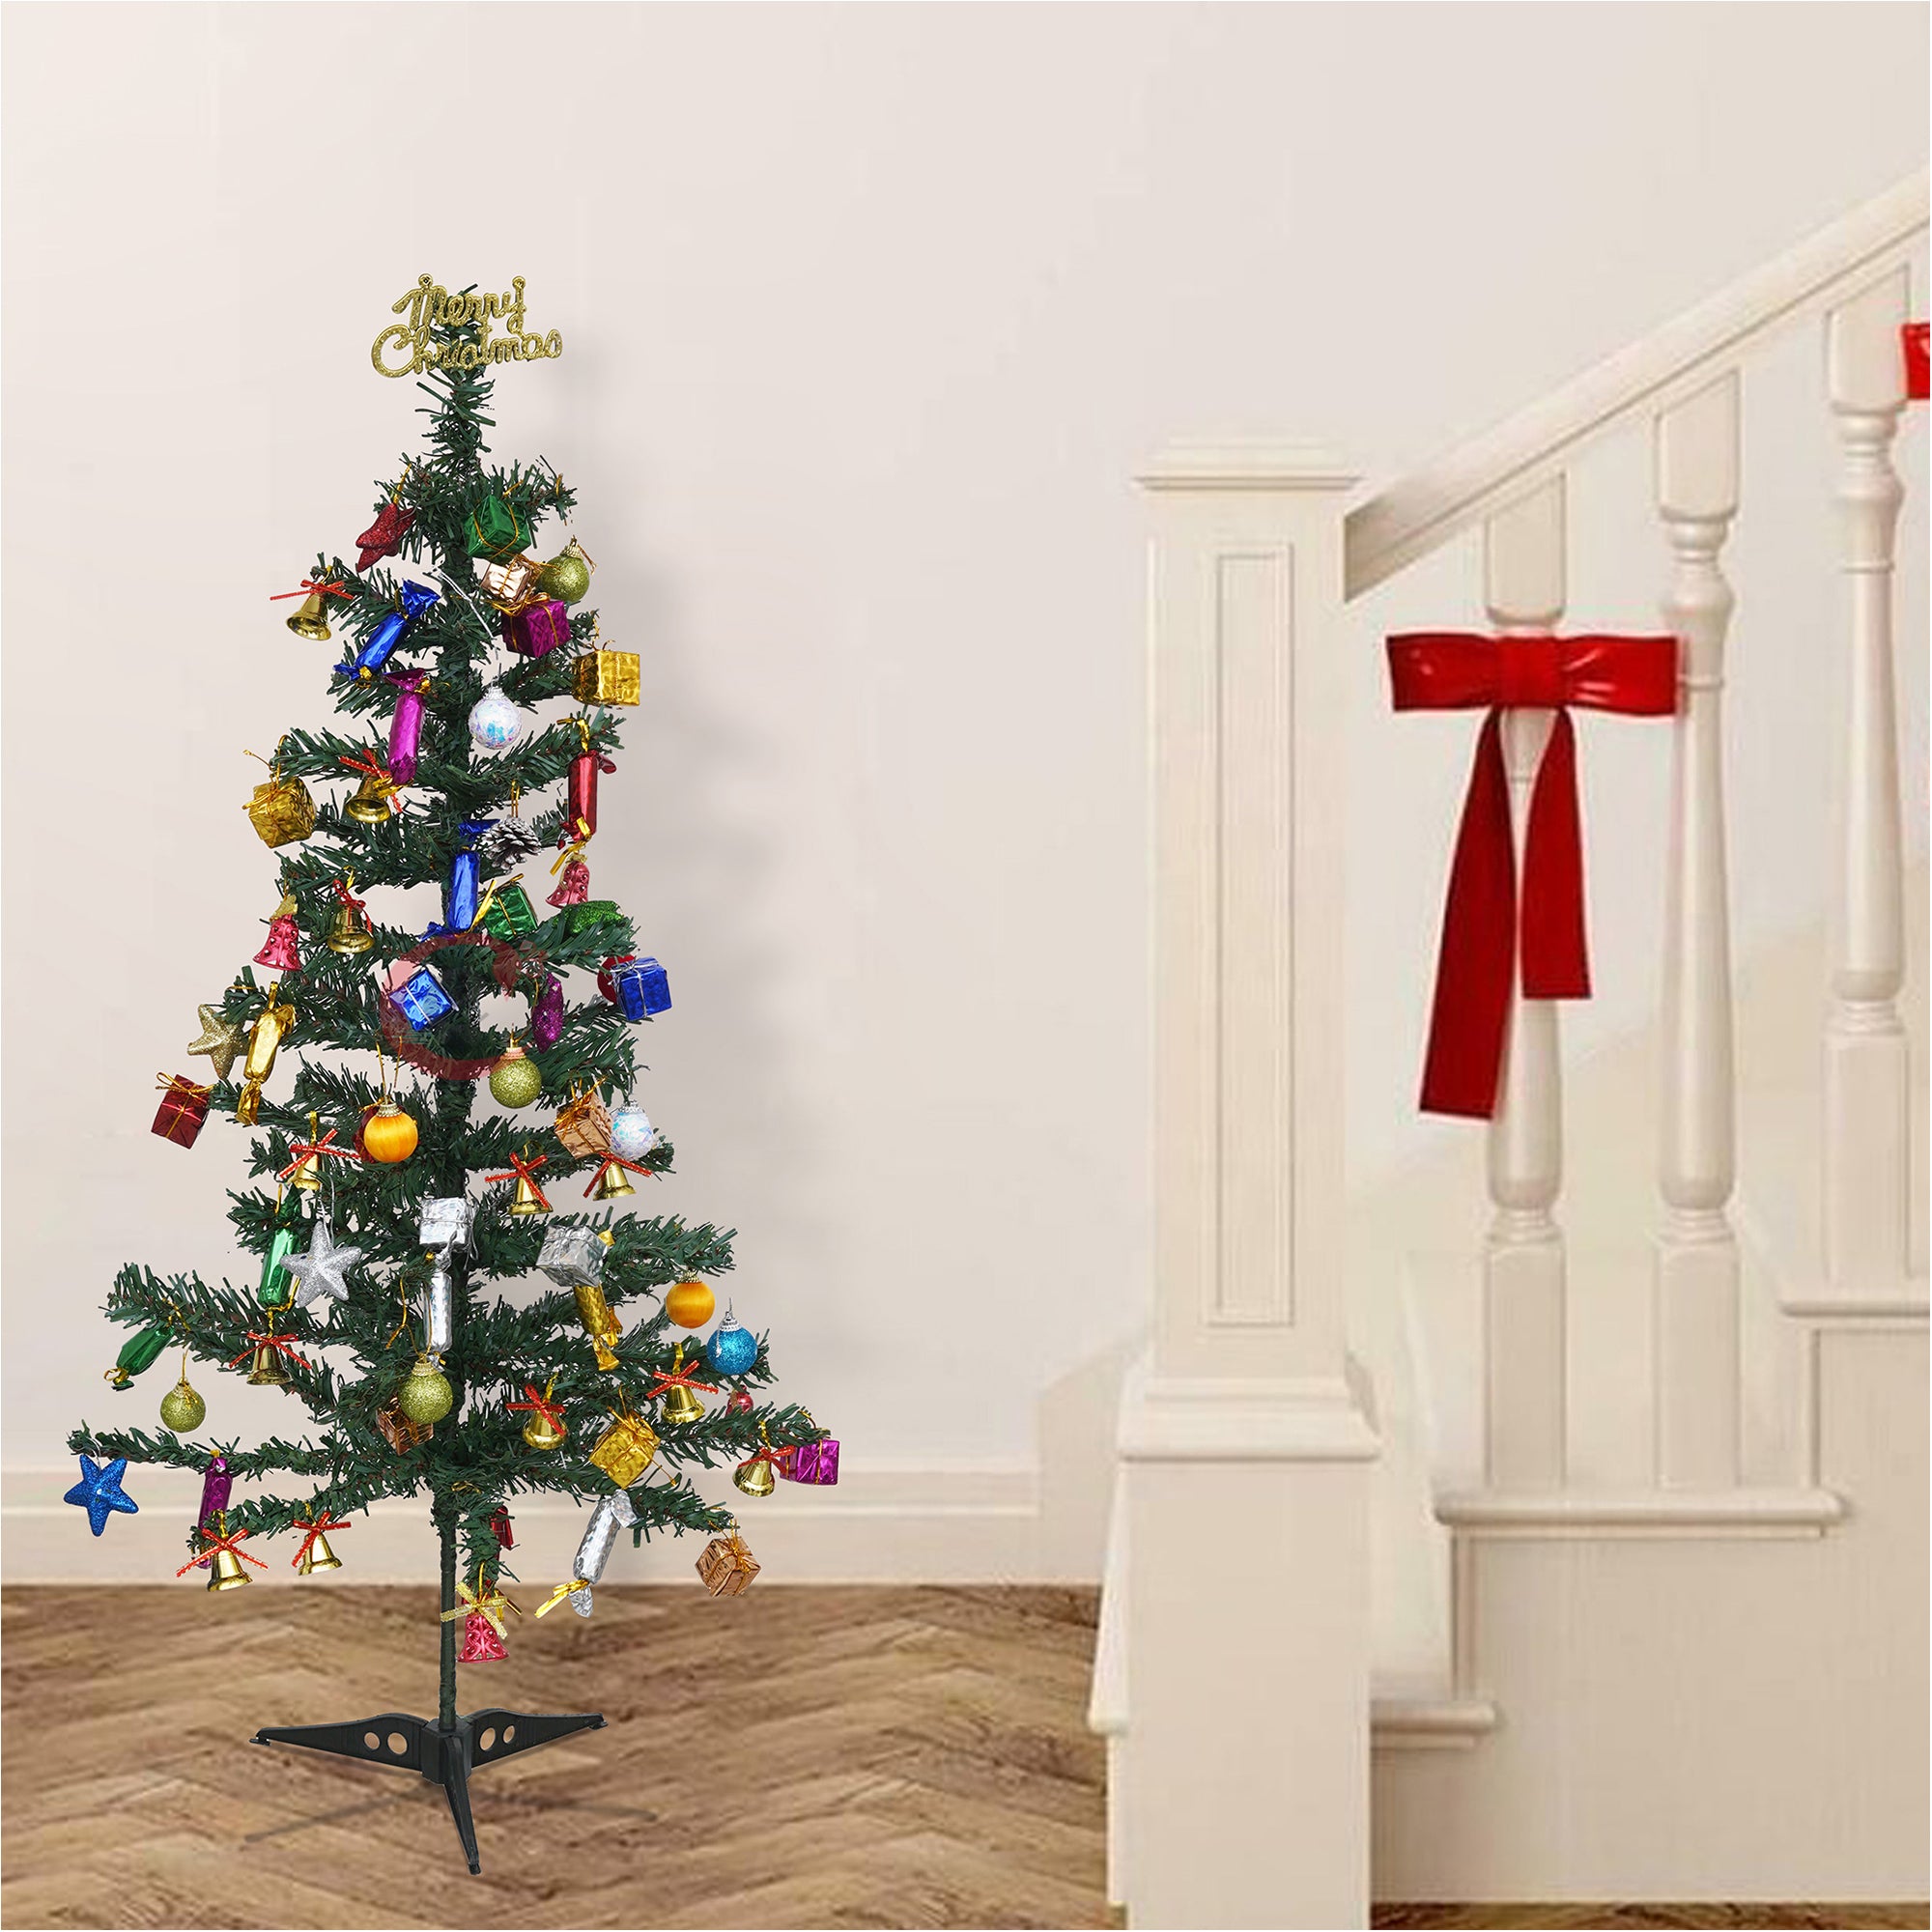 eCraftIndia 4 Feet Green Artificial Christmas Tree Xmas Pine Tree with Metal Stand - Xmas Tree for Indoor, Outdoor, Home, Living Room, Office, Church Decor - Merry Christmas Decoration Item… 5